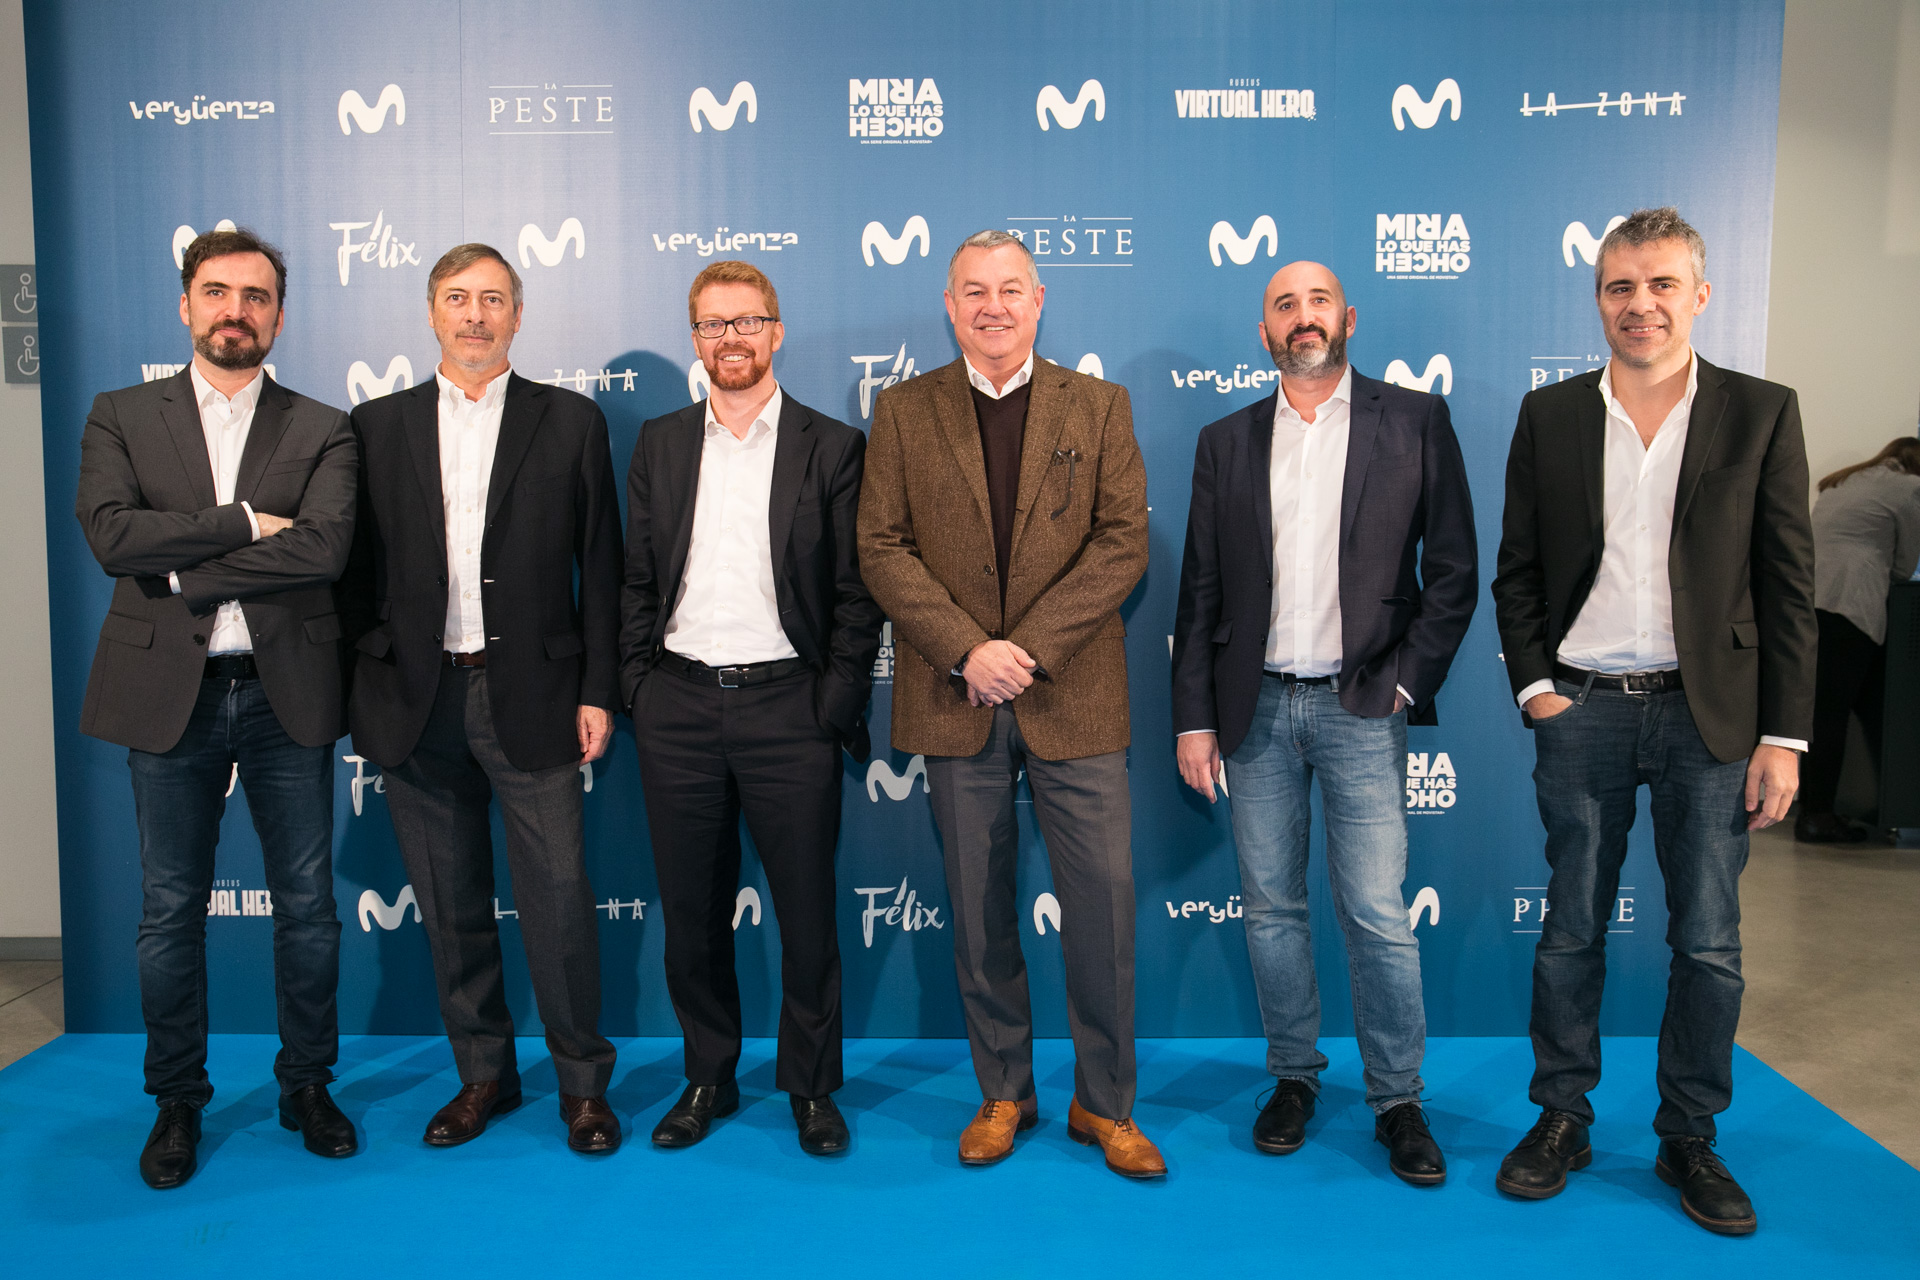 From left to right: Alberto Sánchez-Cabezudo (creator of ‘La Zona’ (‘The Zone’)), José Antonio Félez (Executive Producer of ‘La Peste’ (‘The Plague’)), Sergio Oslé (President of Movistar+), Michael Duncan (CEO of the Telefónica Global Consumer Unit), Jorge Sánchez-Cabezudo (creator of ‘La Zona’ (‘The Zone’), and Domingo Corral (Director of Fiction at Movistar+), at the presentation of global strategy for its original series